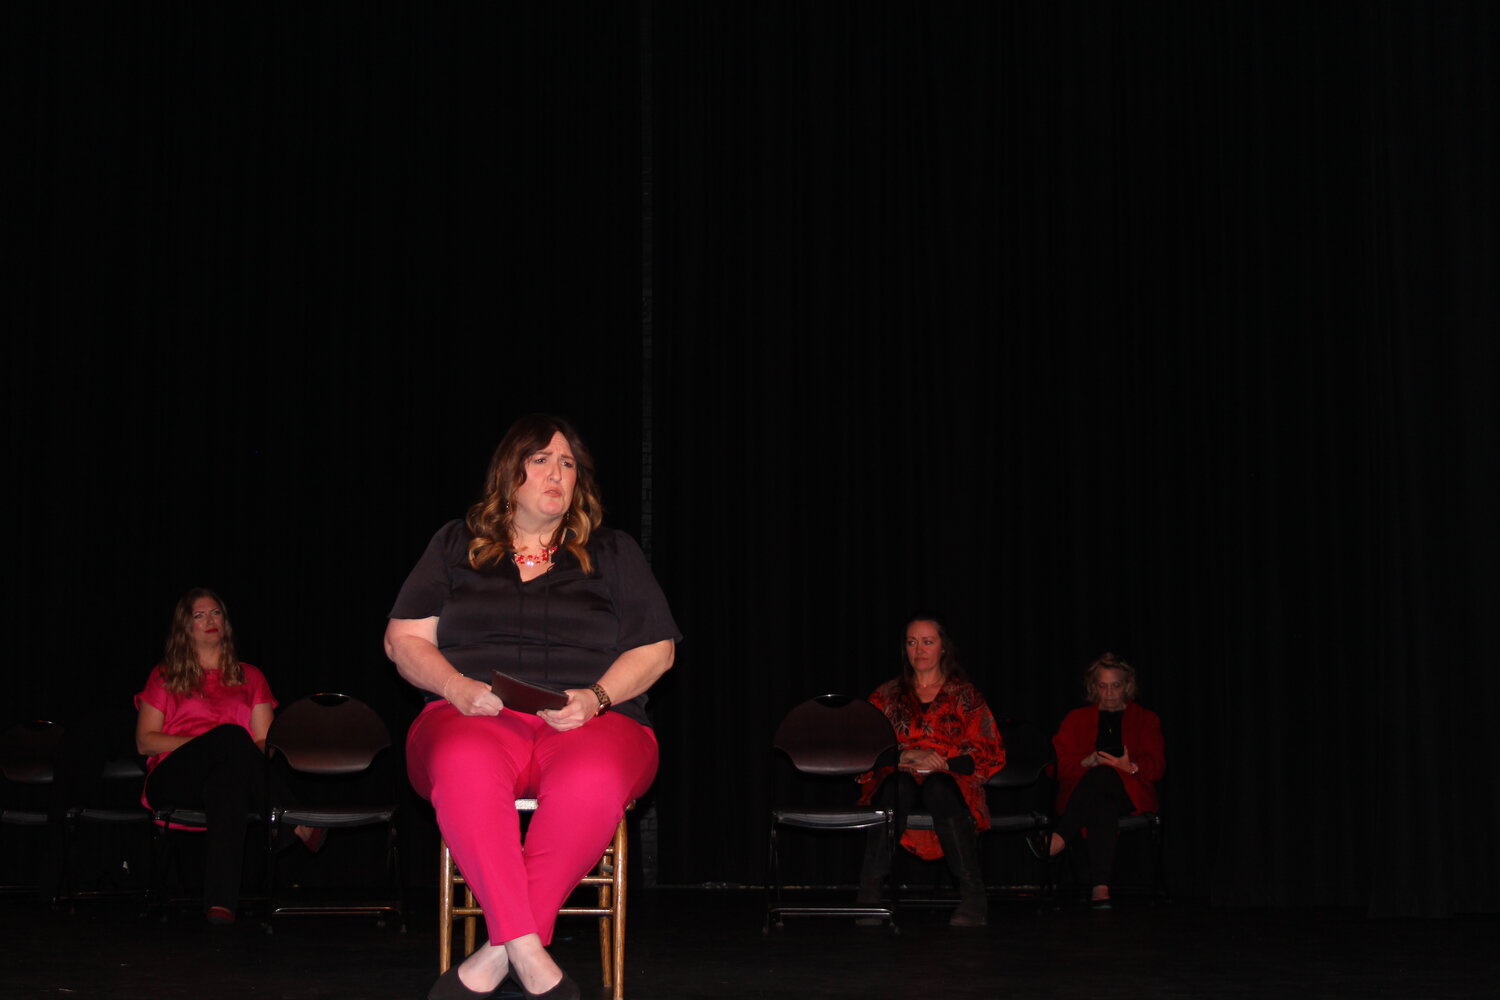 Aimee Cogger performs during the Soroptimist’s production of “The Vagina Monologues,” held Saturday, Feb. 24, at the Strand Theatre.